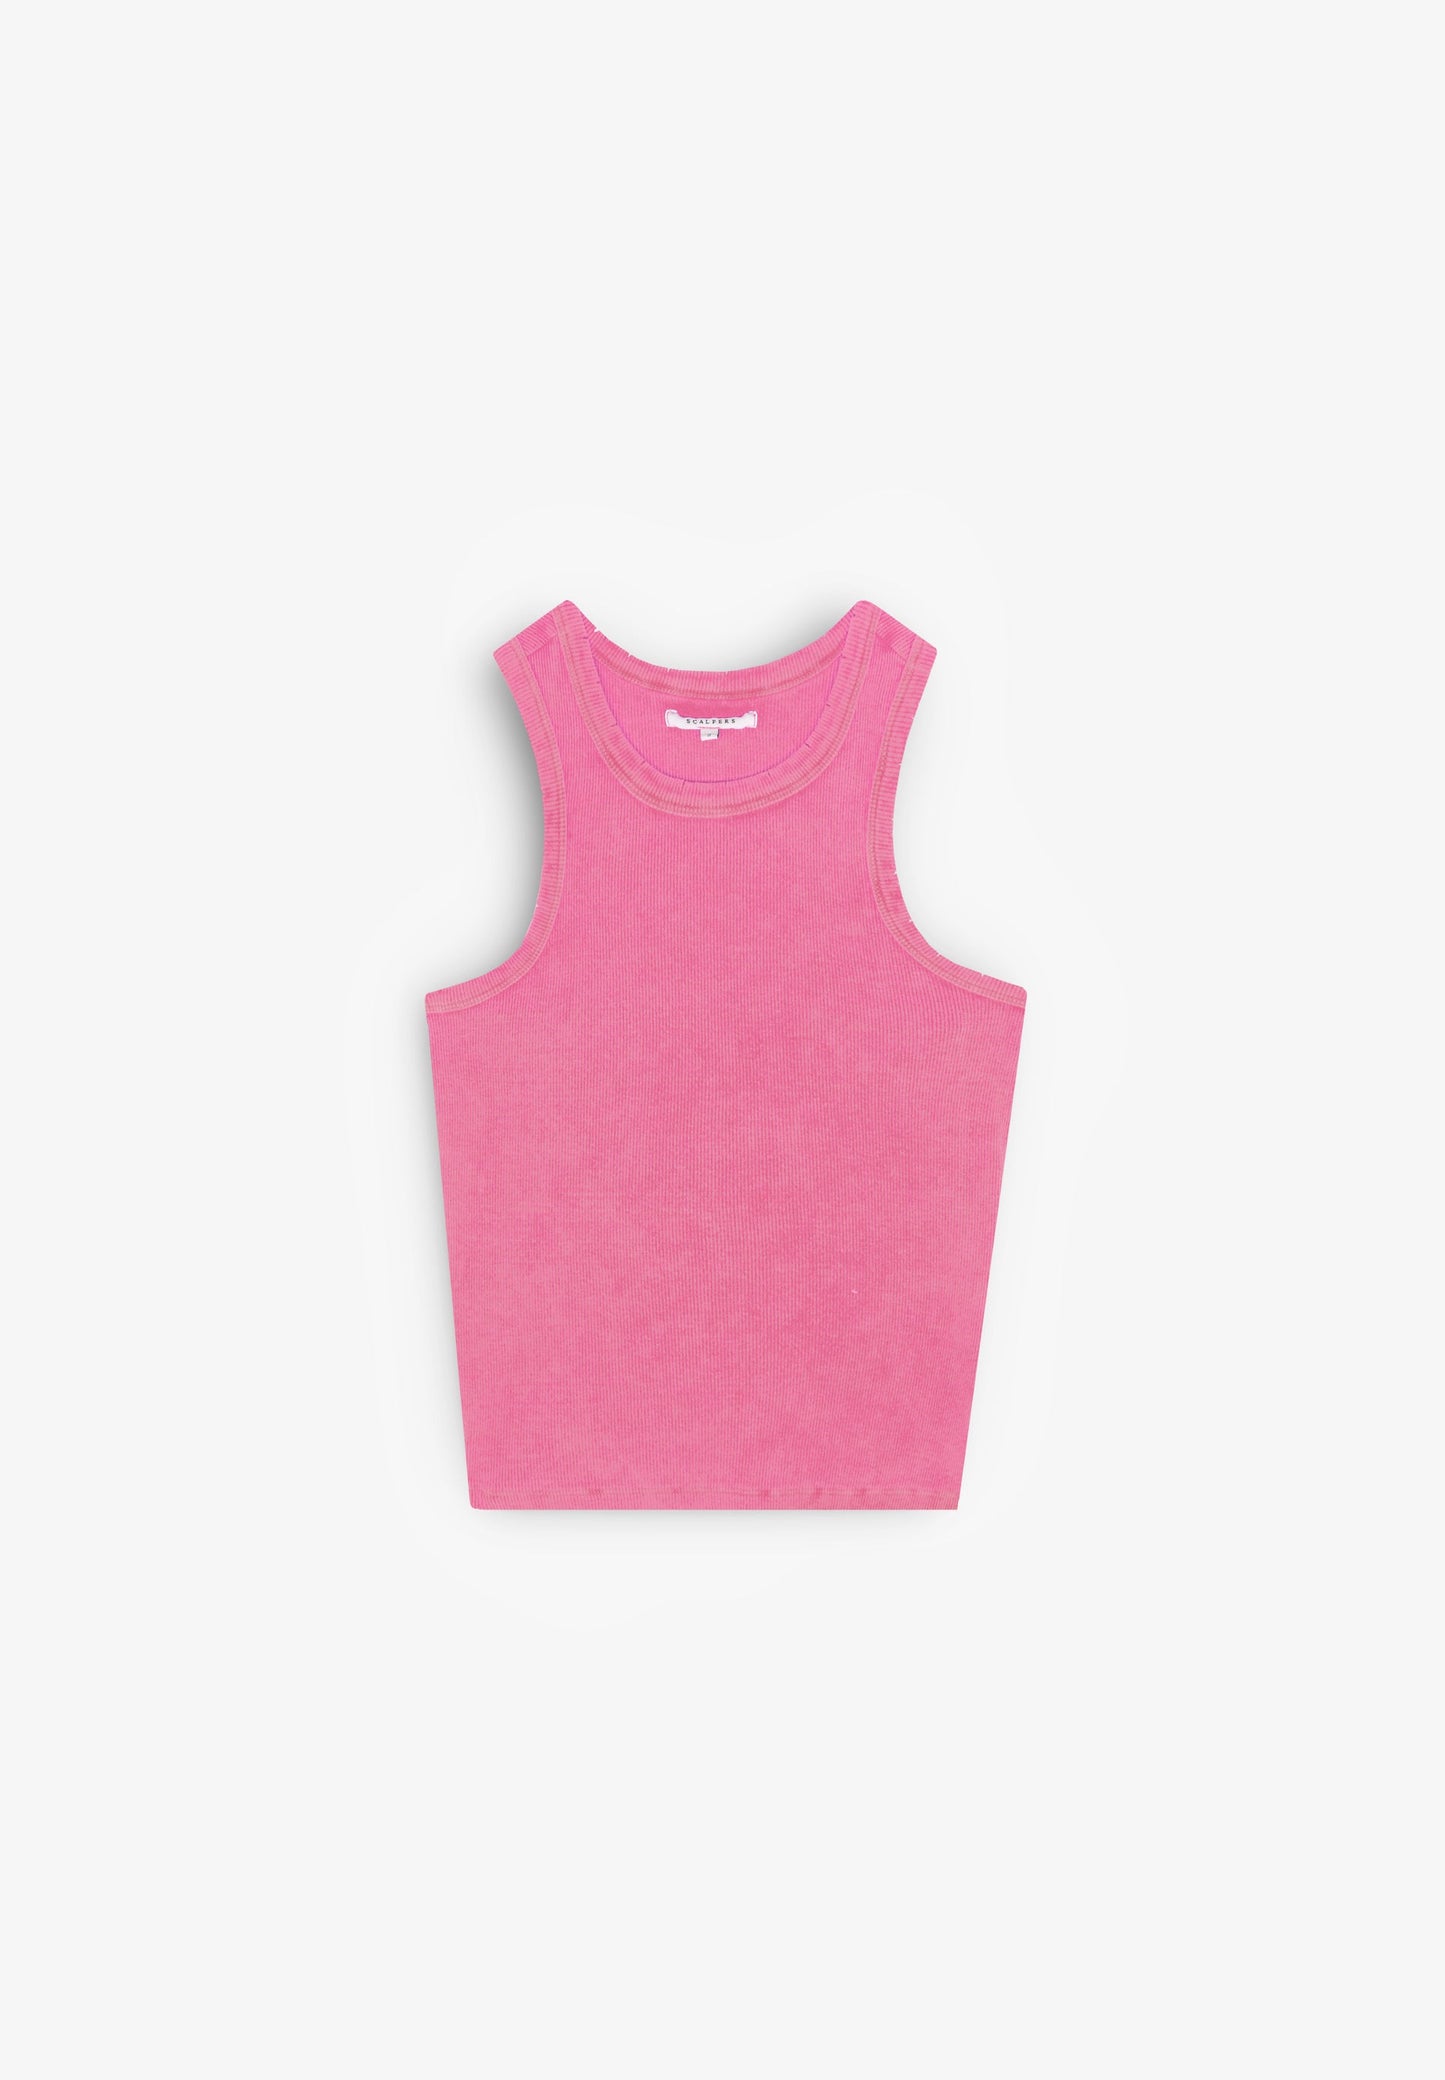 FADED EFFECT TANK TOP